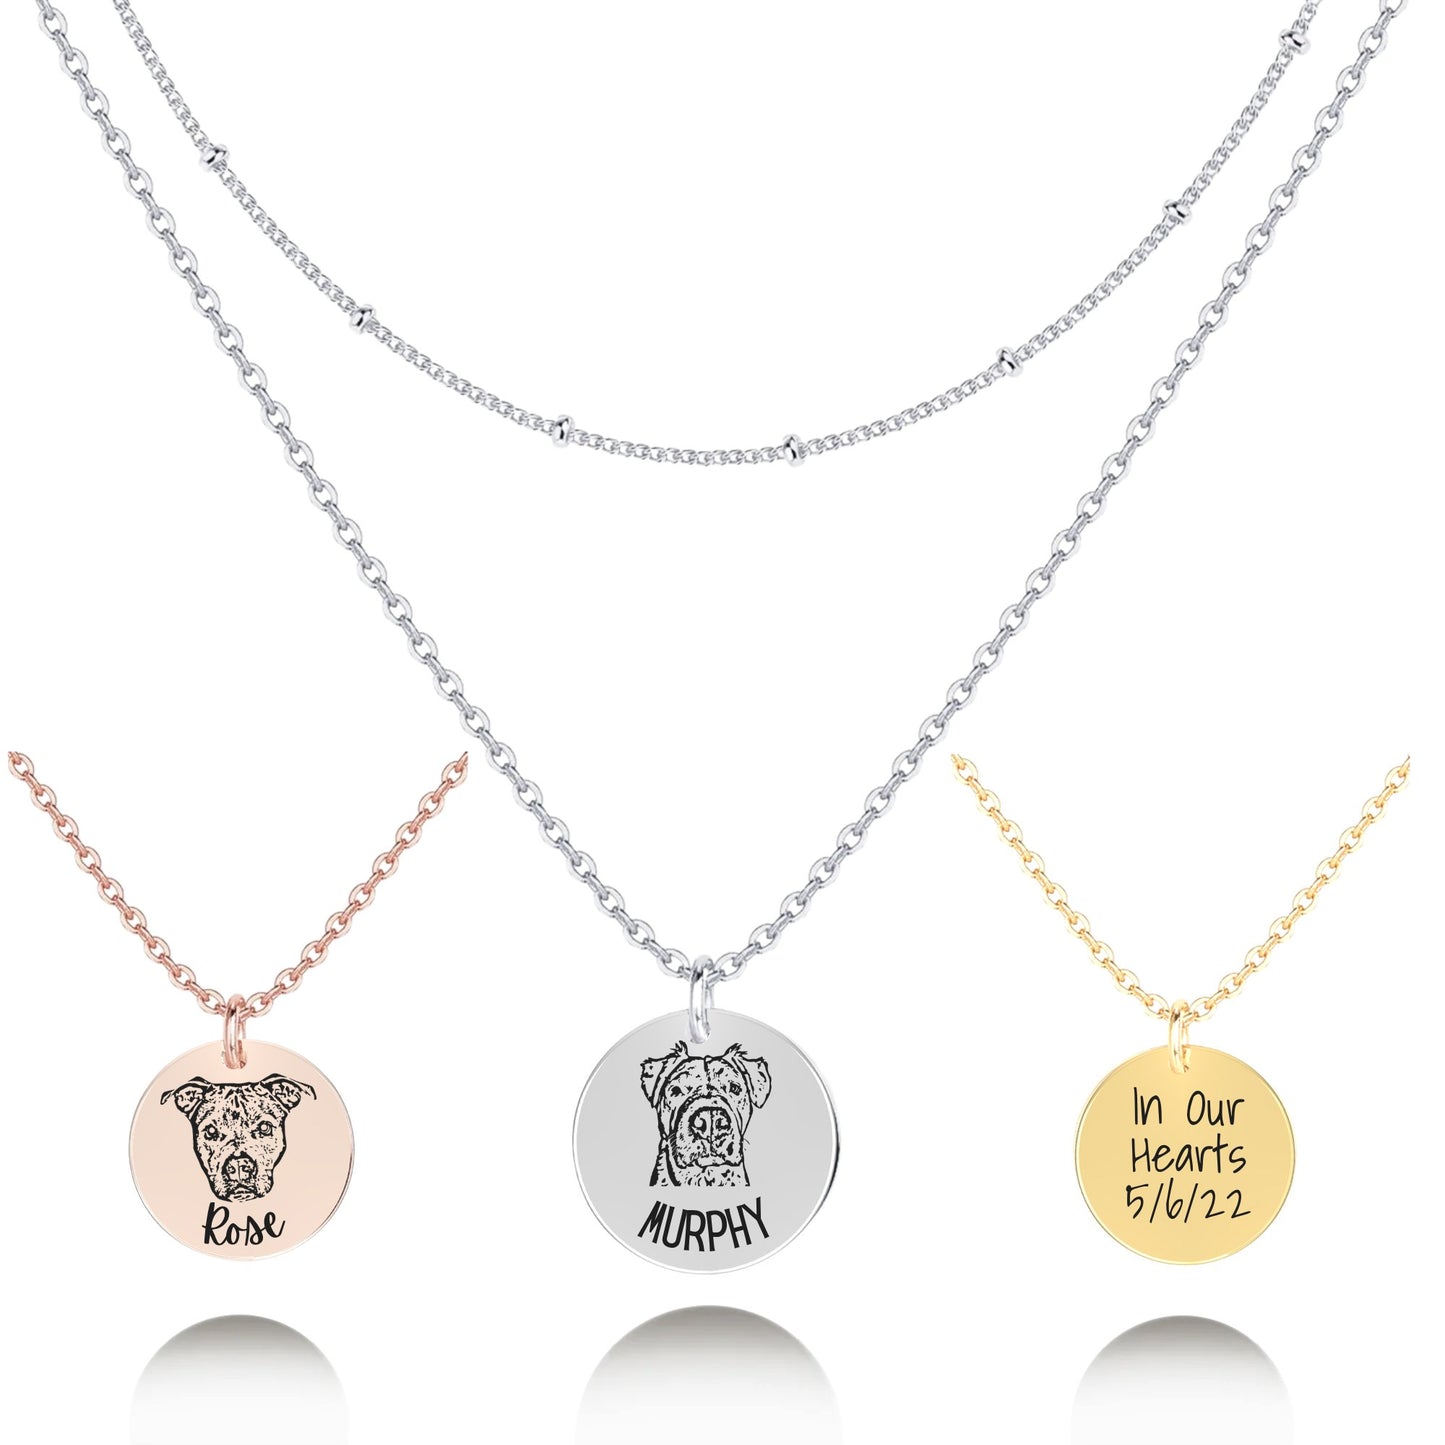 Necklace - Engraved Necklace with Engraved Pet's Face (Rose Gold)